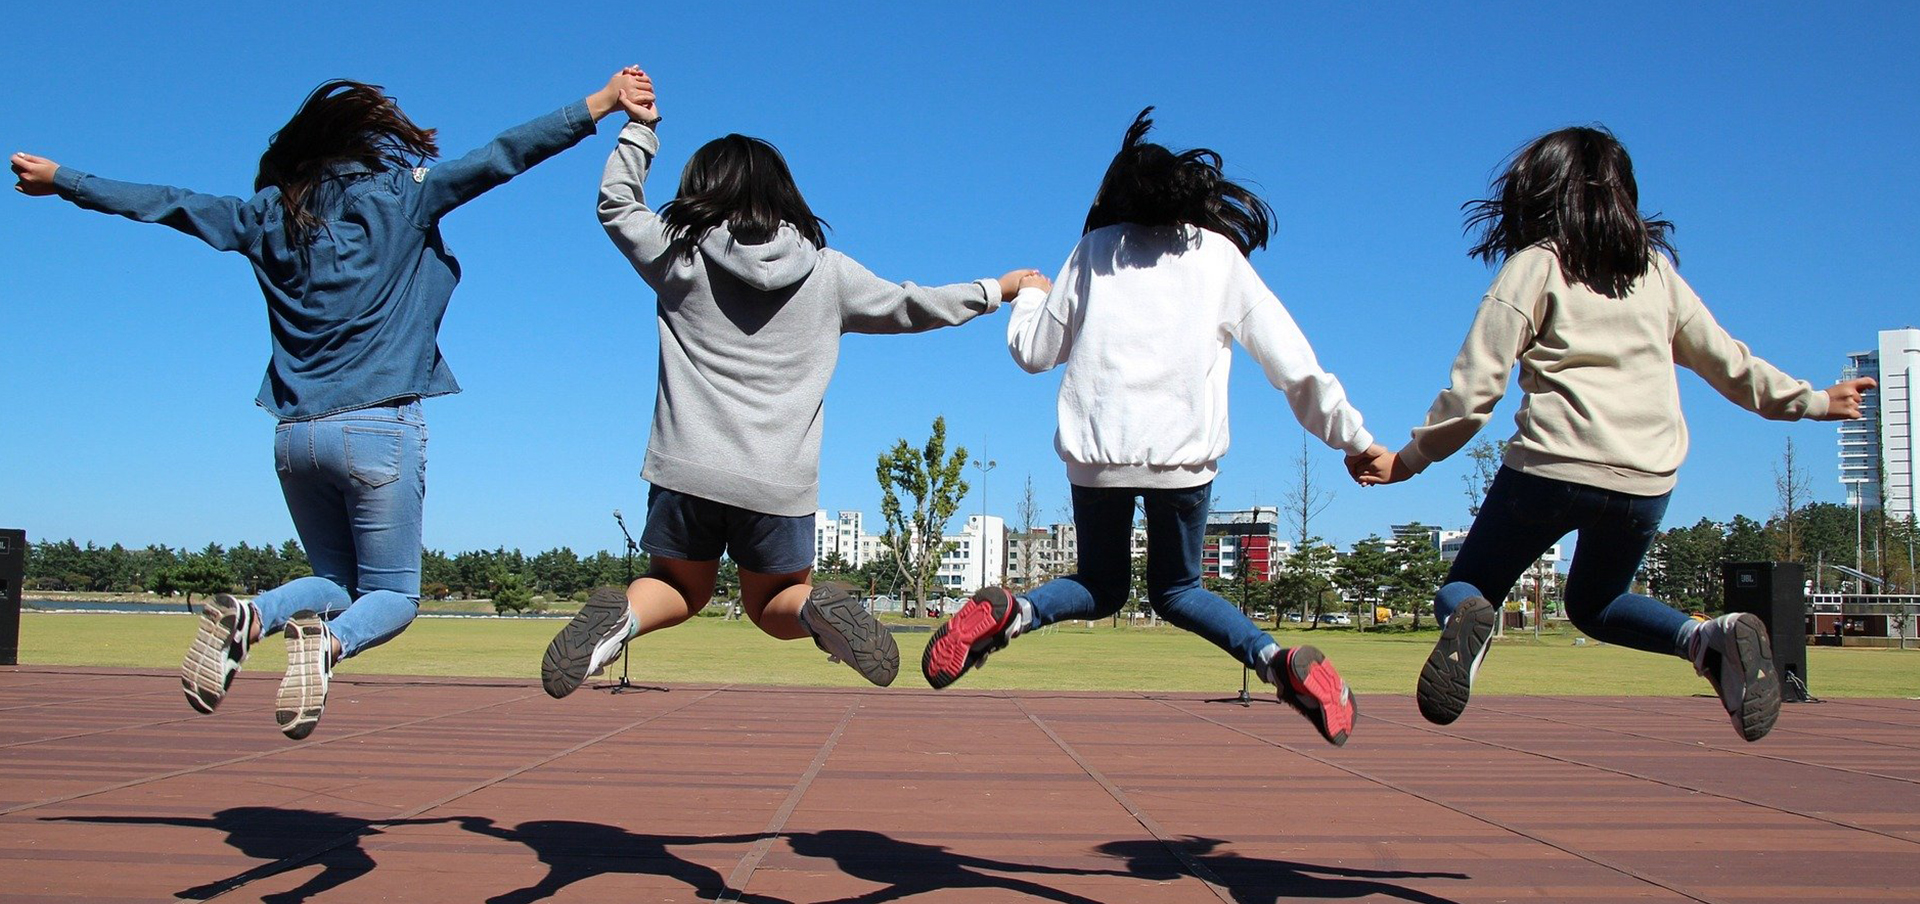 Preteen girls jumping while holding hands